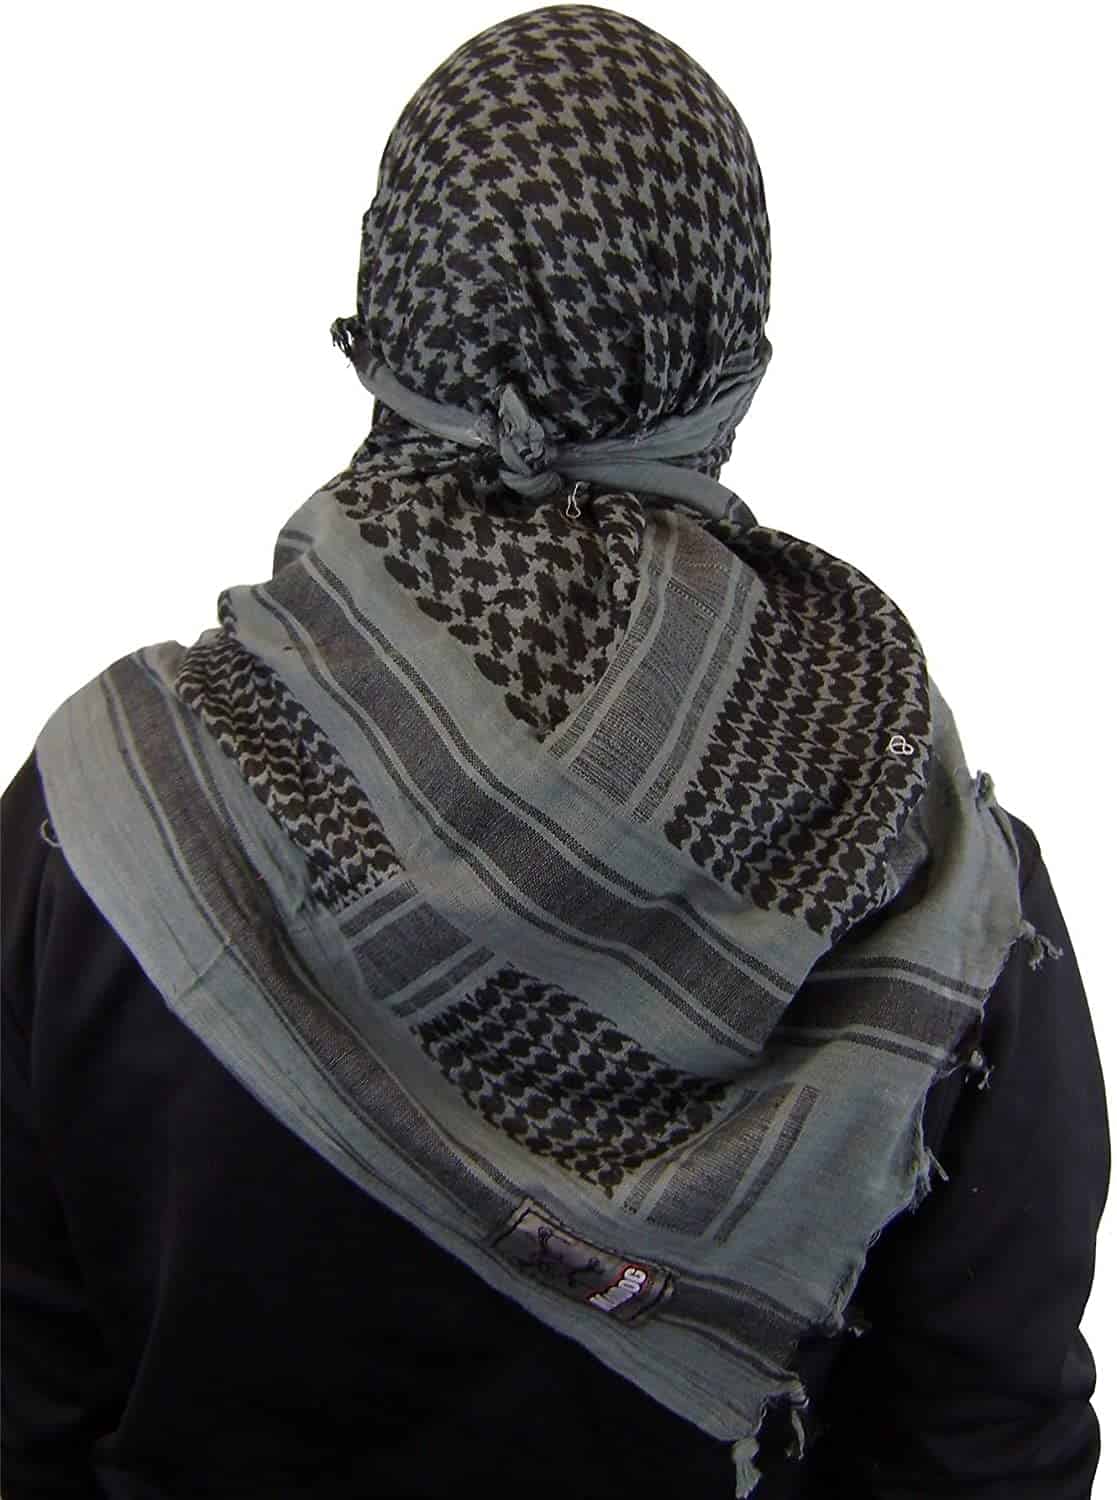 Shemagh Scarf Military Wrap windproof 100% cotton